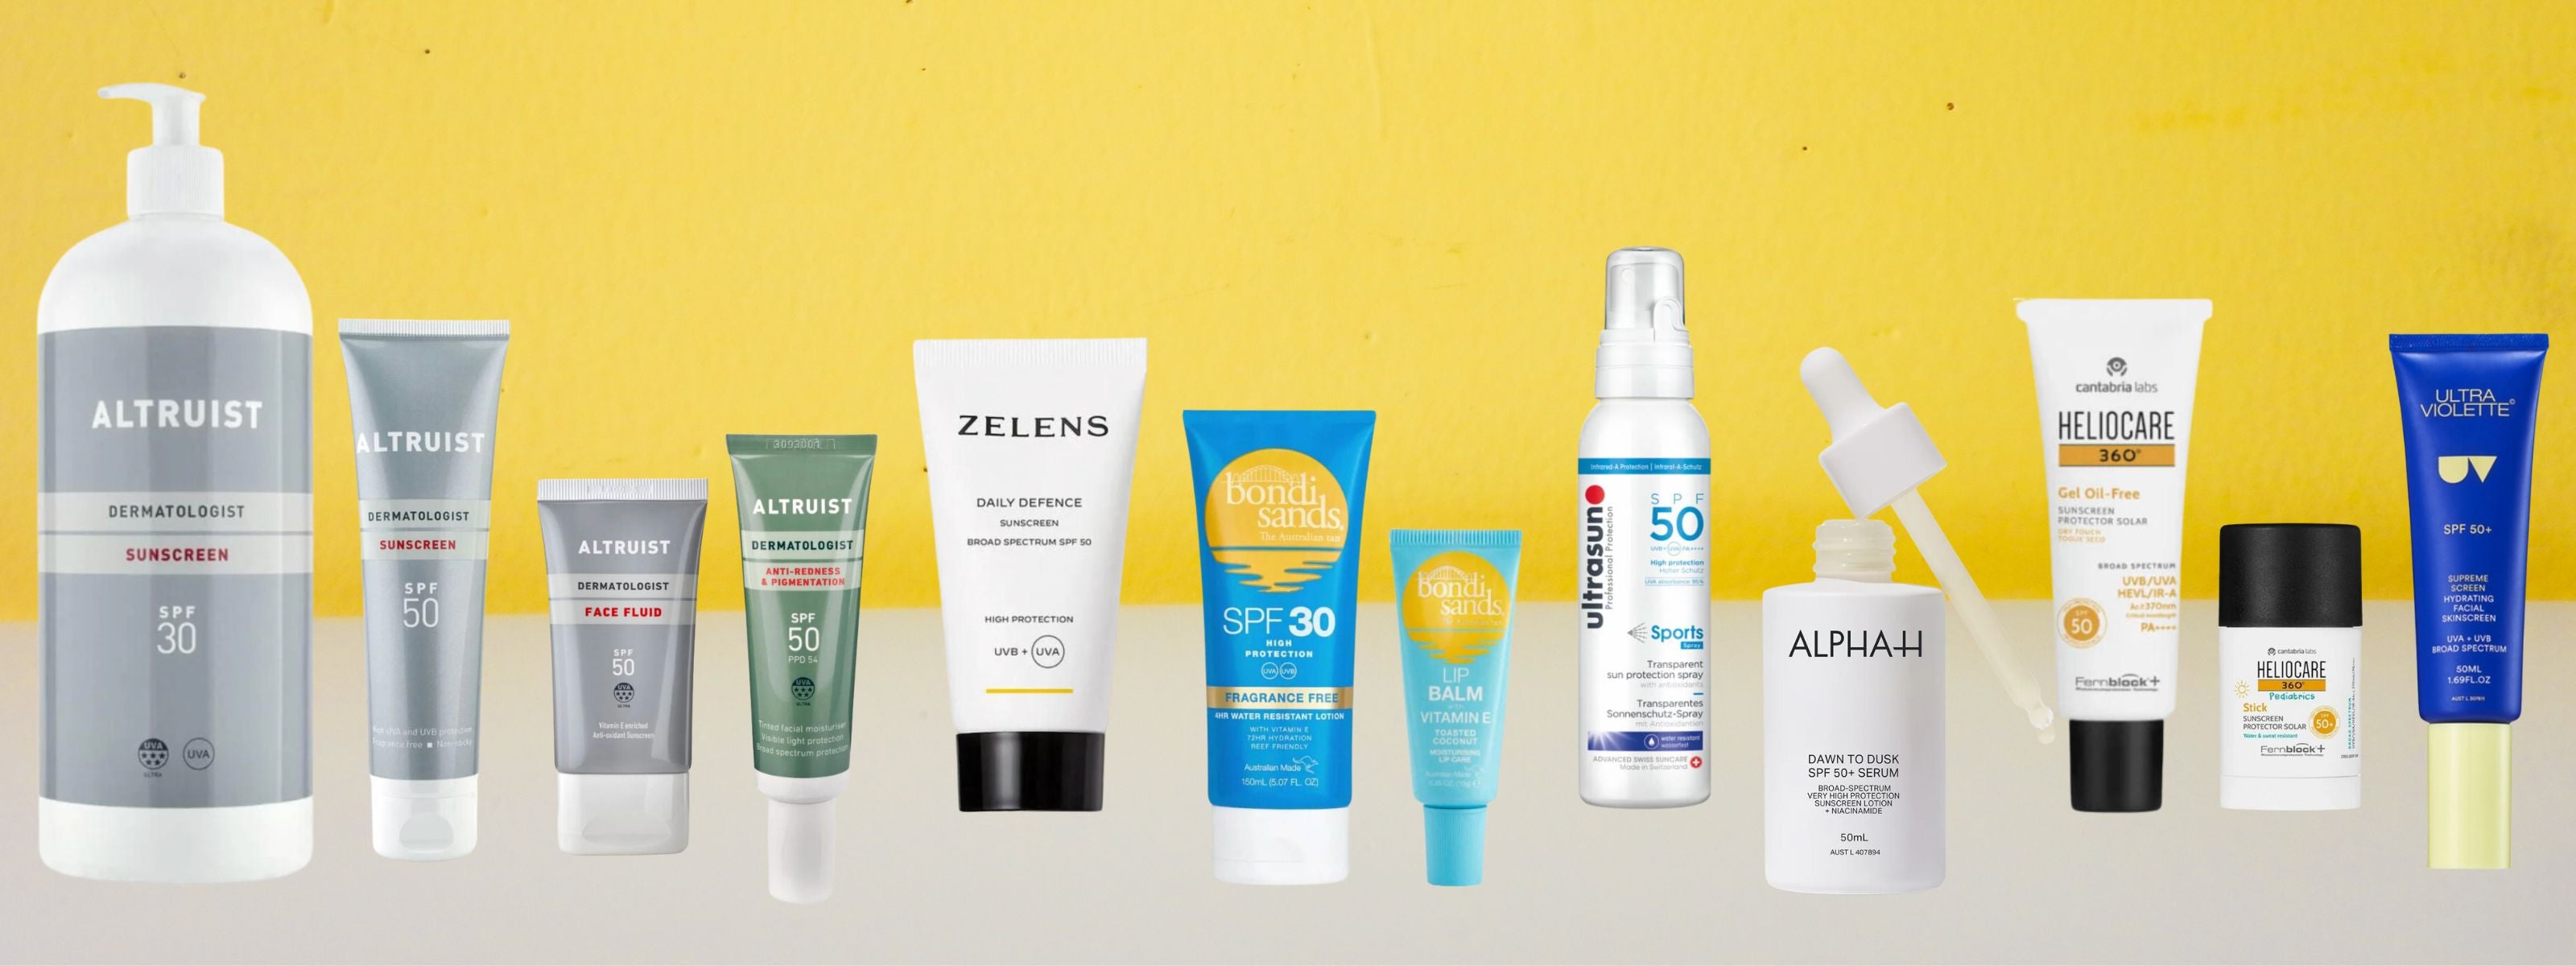 Cracking the code on SPF - Your most asked questions answered.